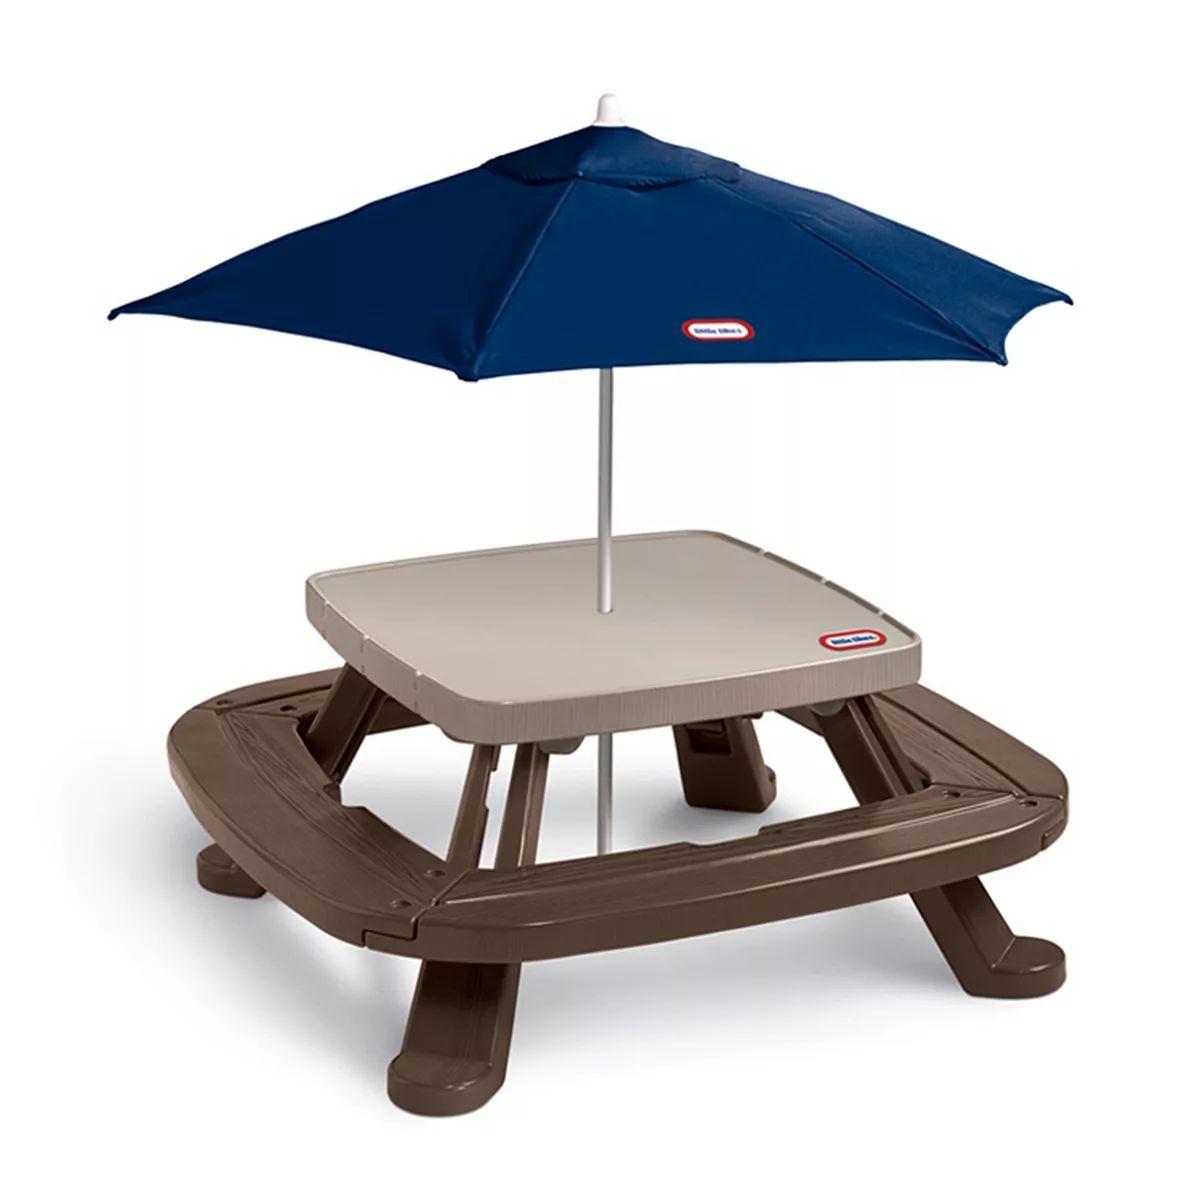 Little Tikes Fold 'n Store Picnic Table with Market Umbrella | Kohl's